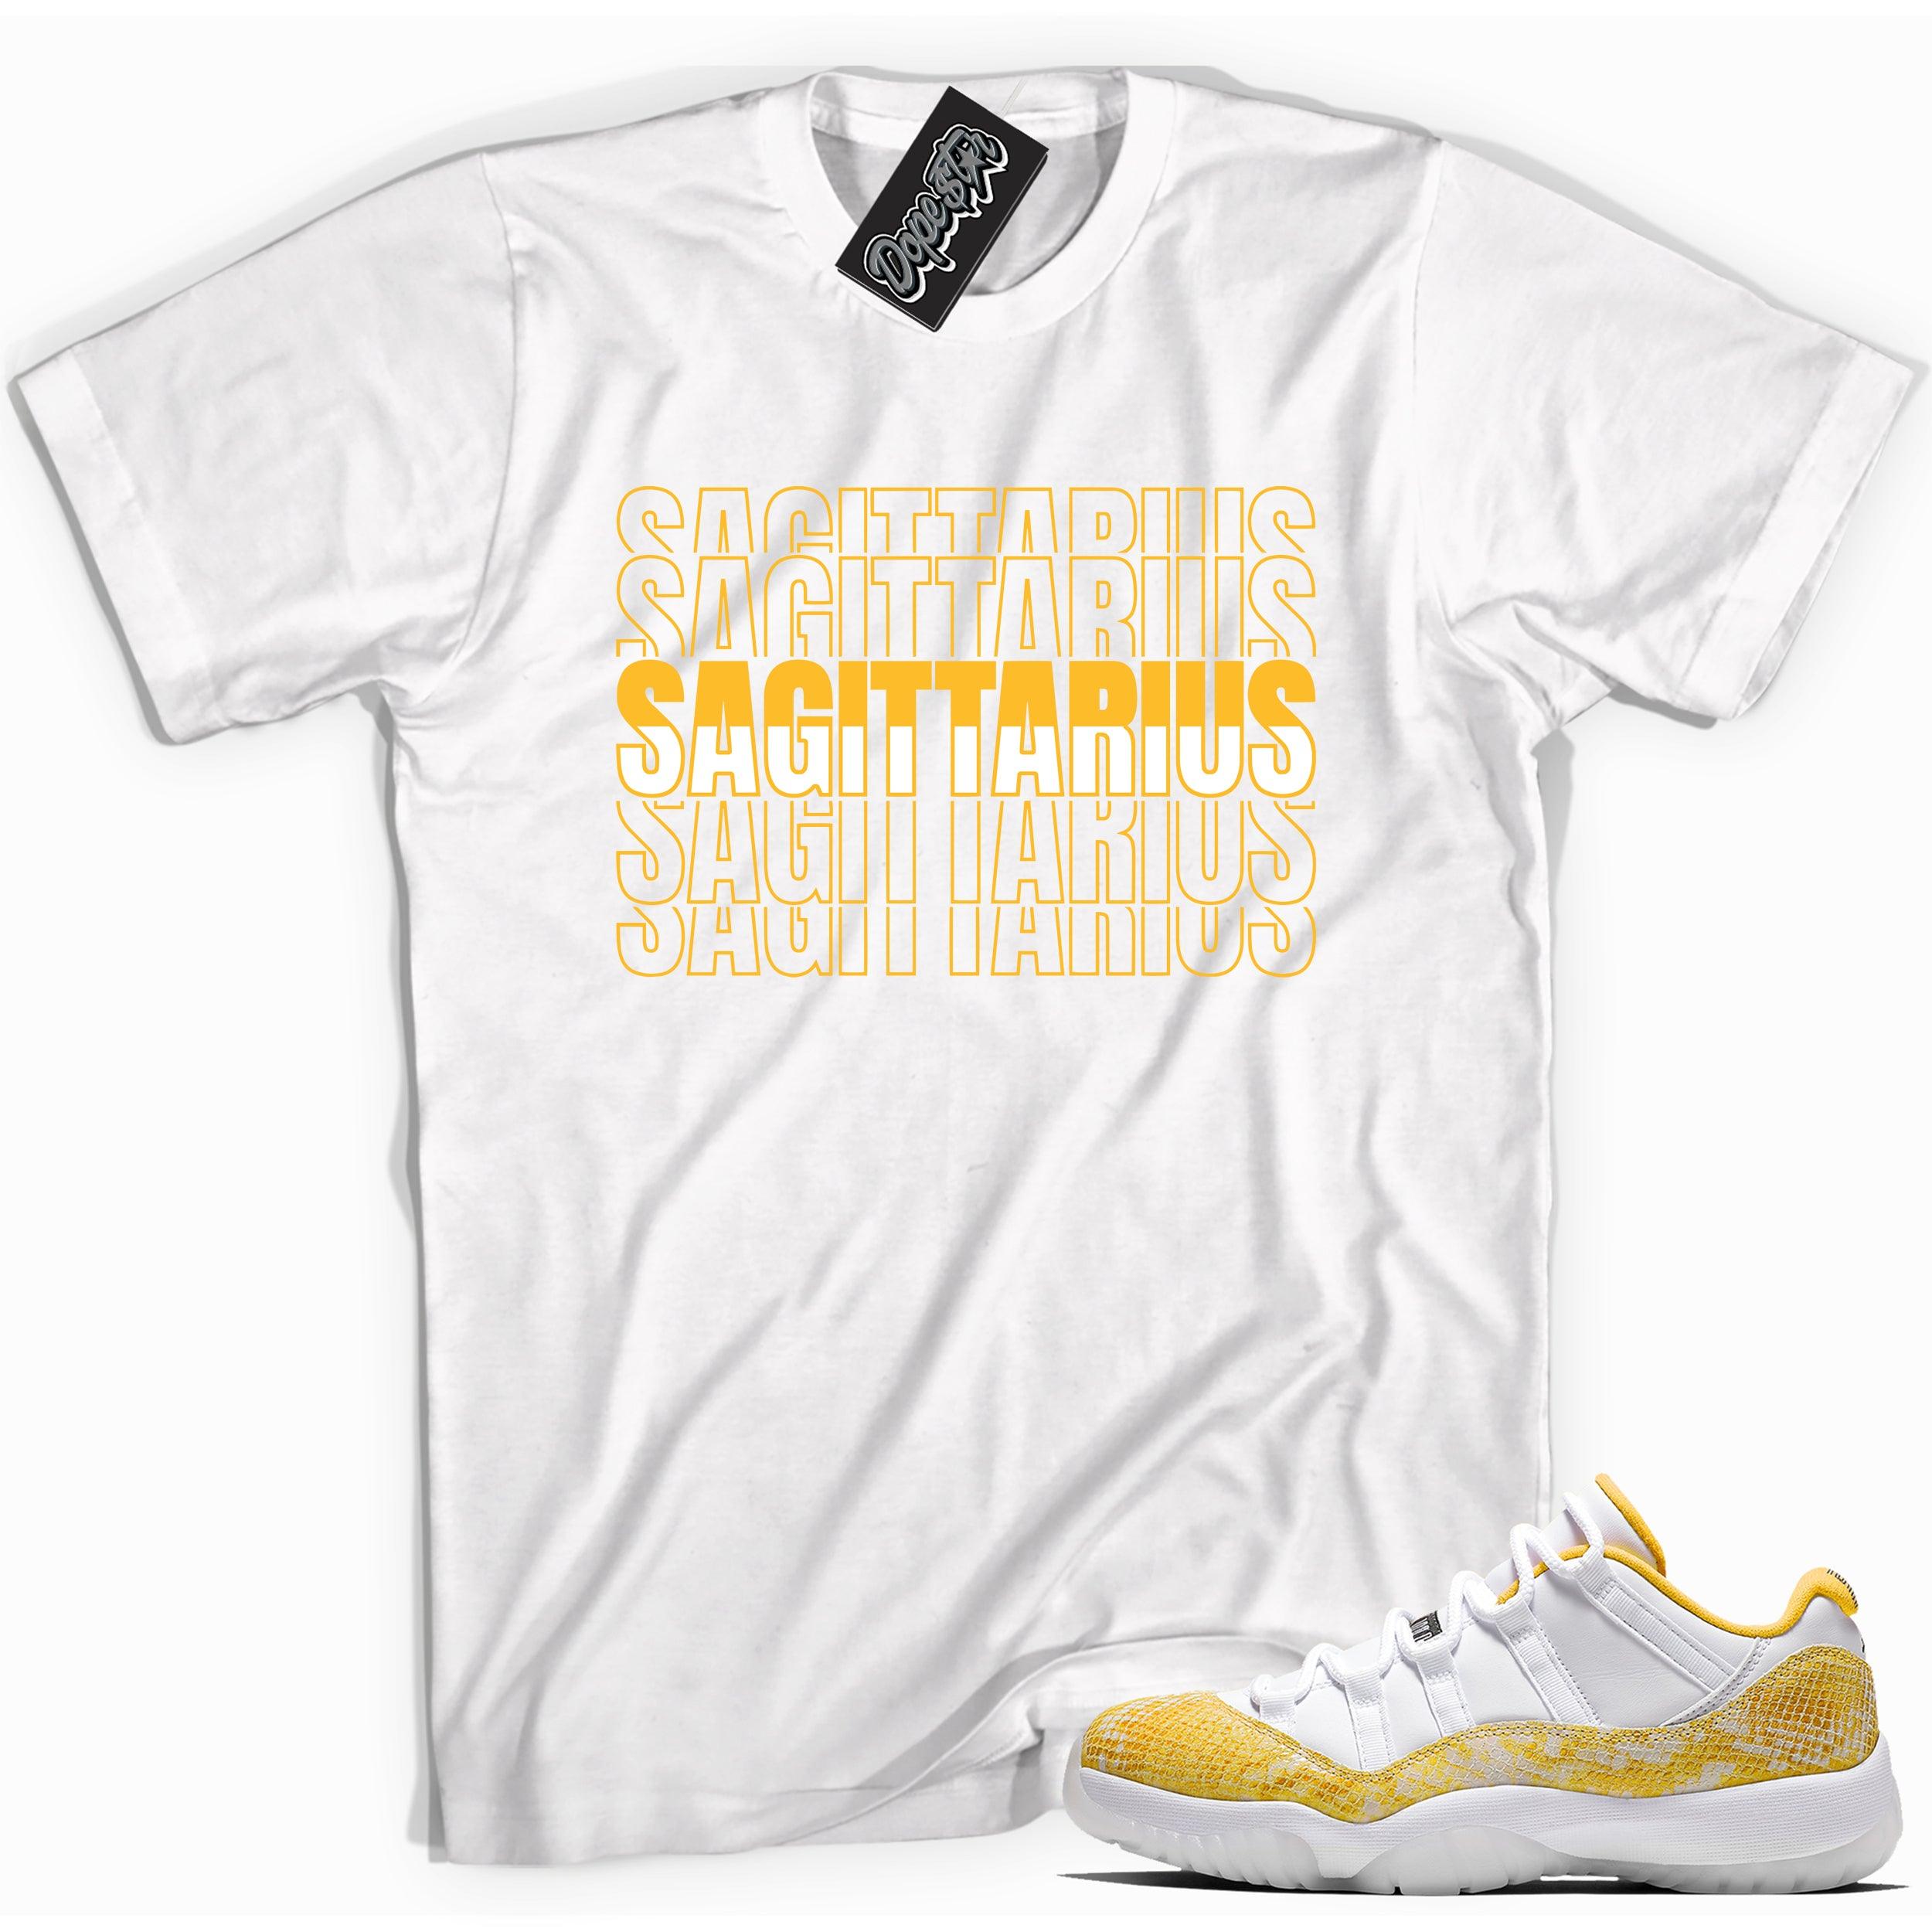 Cool white graphic tee with 'Sagittarius ' print, that perfectly matches Air Jordan 11 Retro Low Yellow Snakeskin sneakers